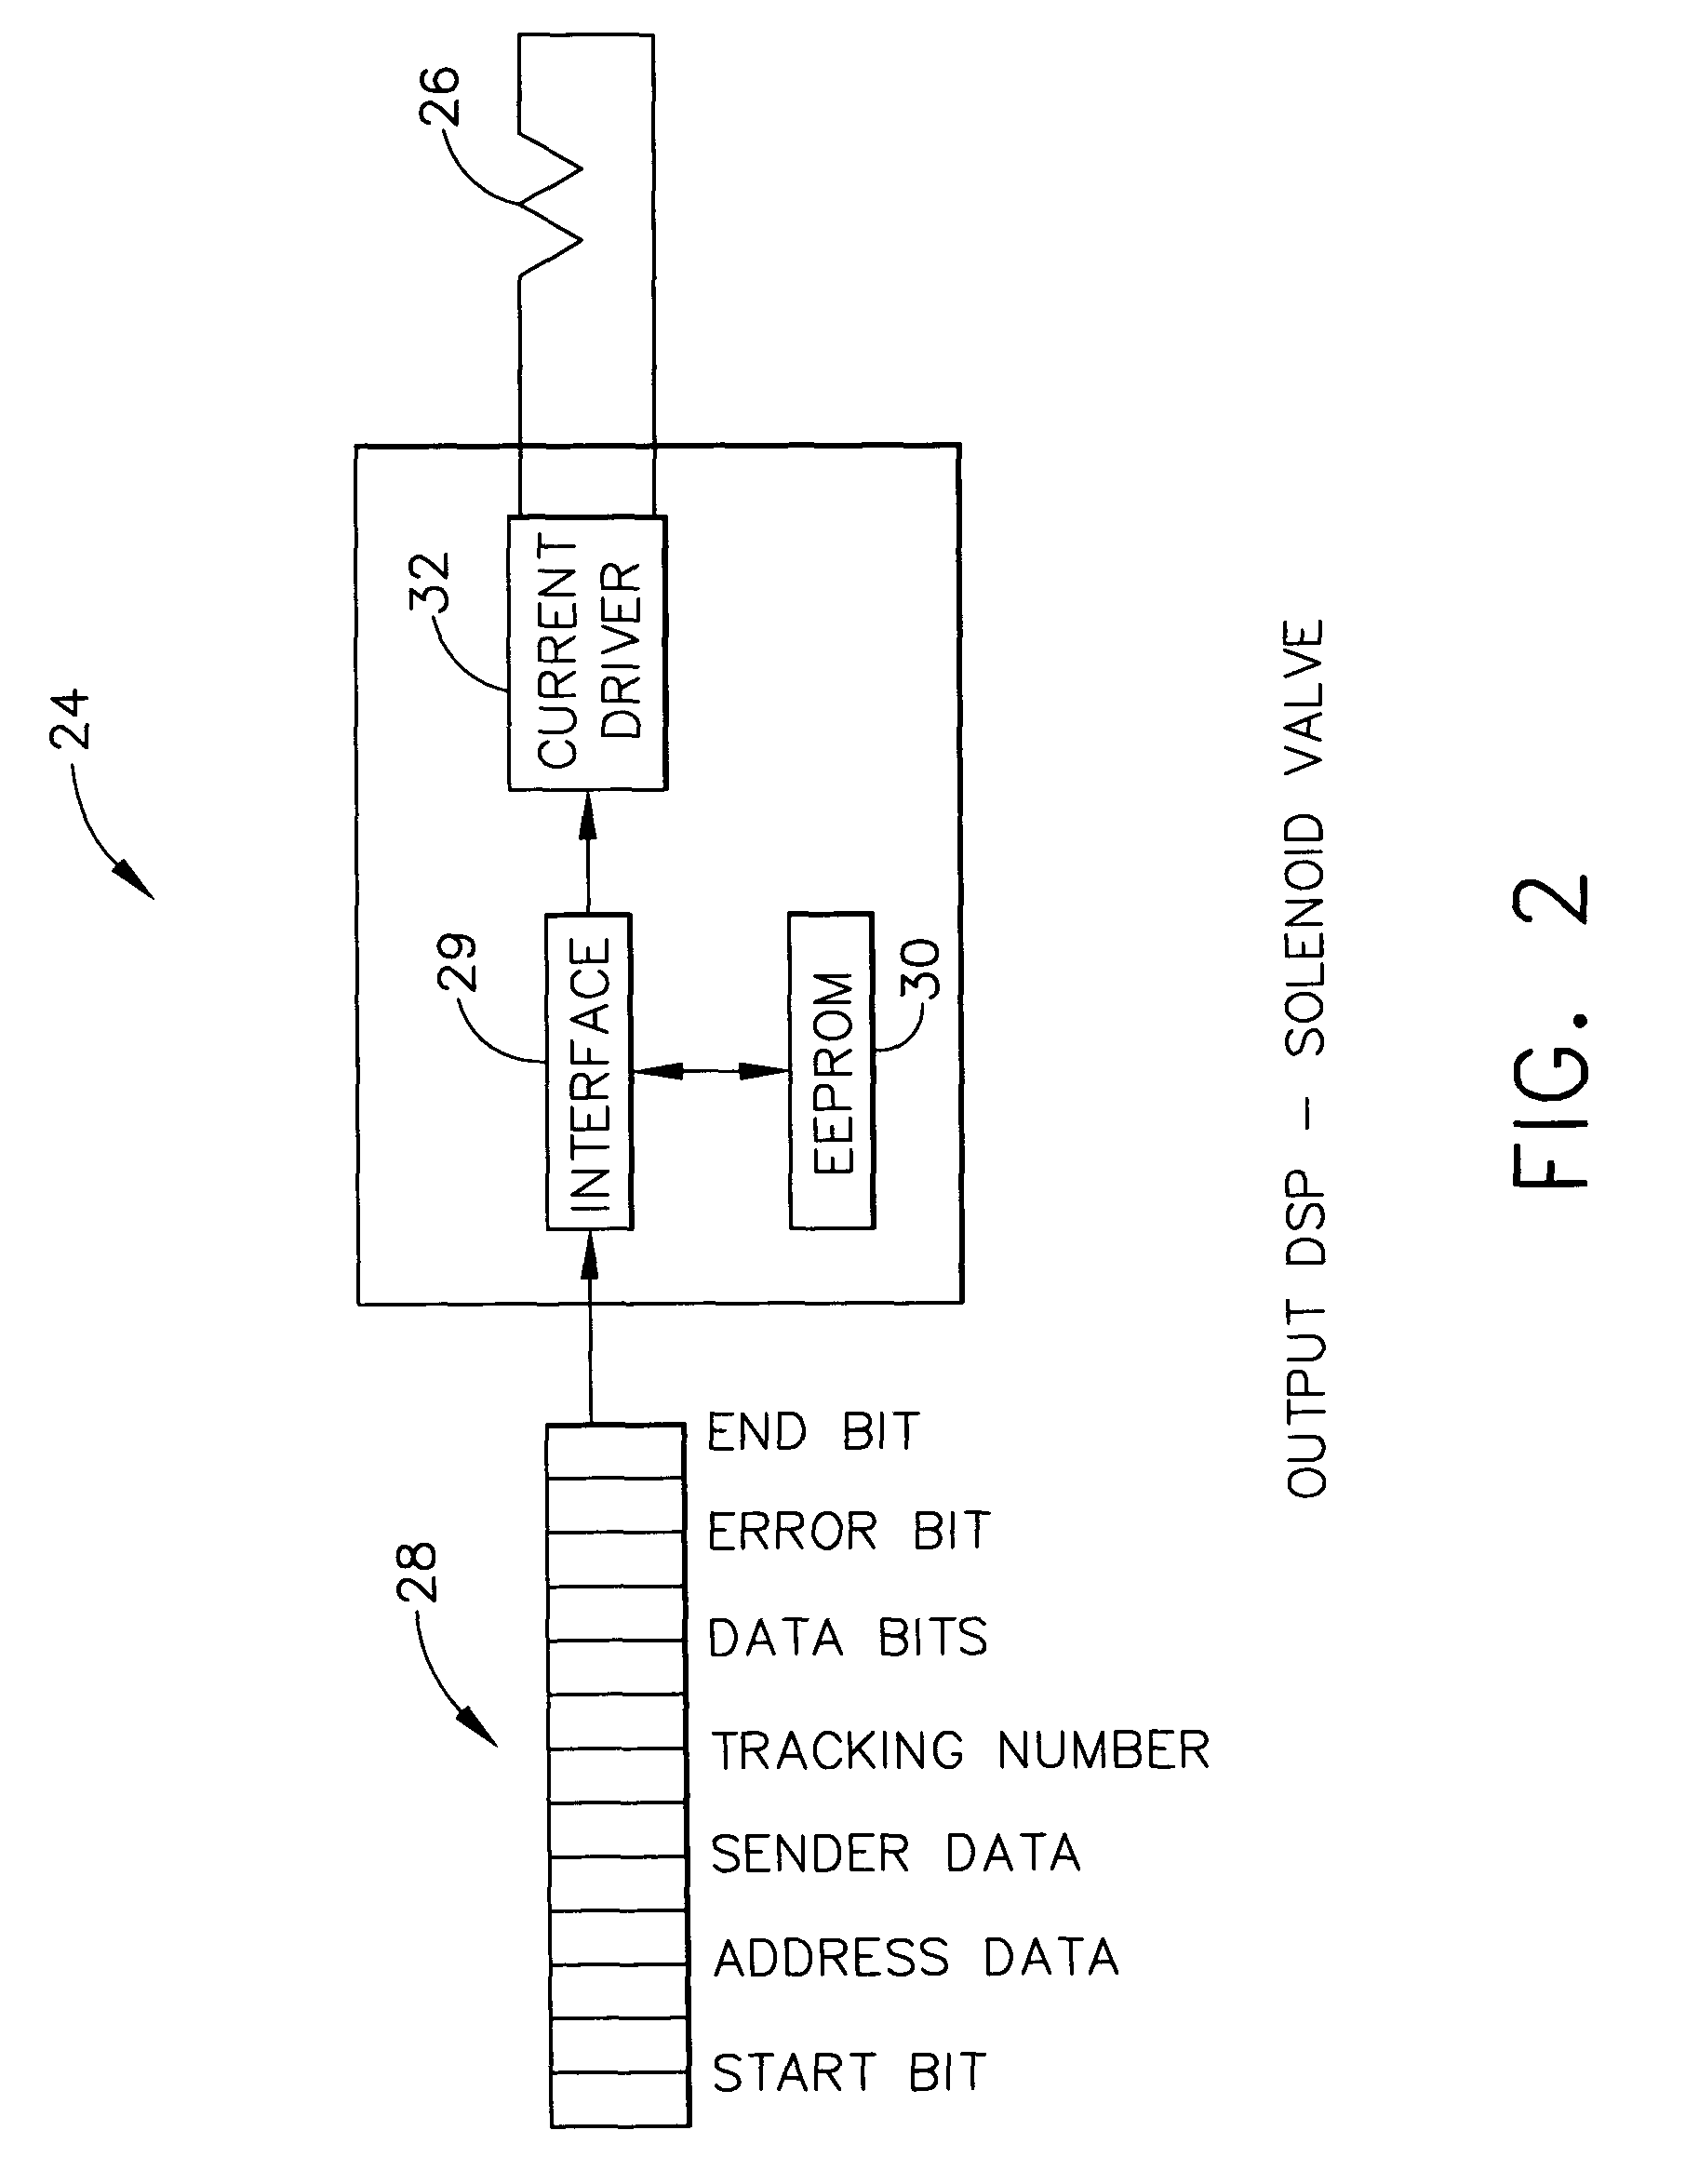 Distributed engine control system and method